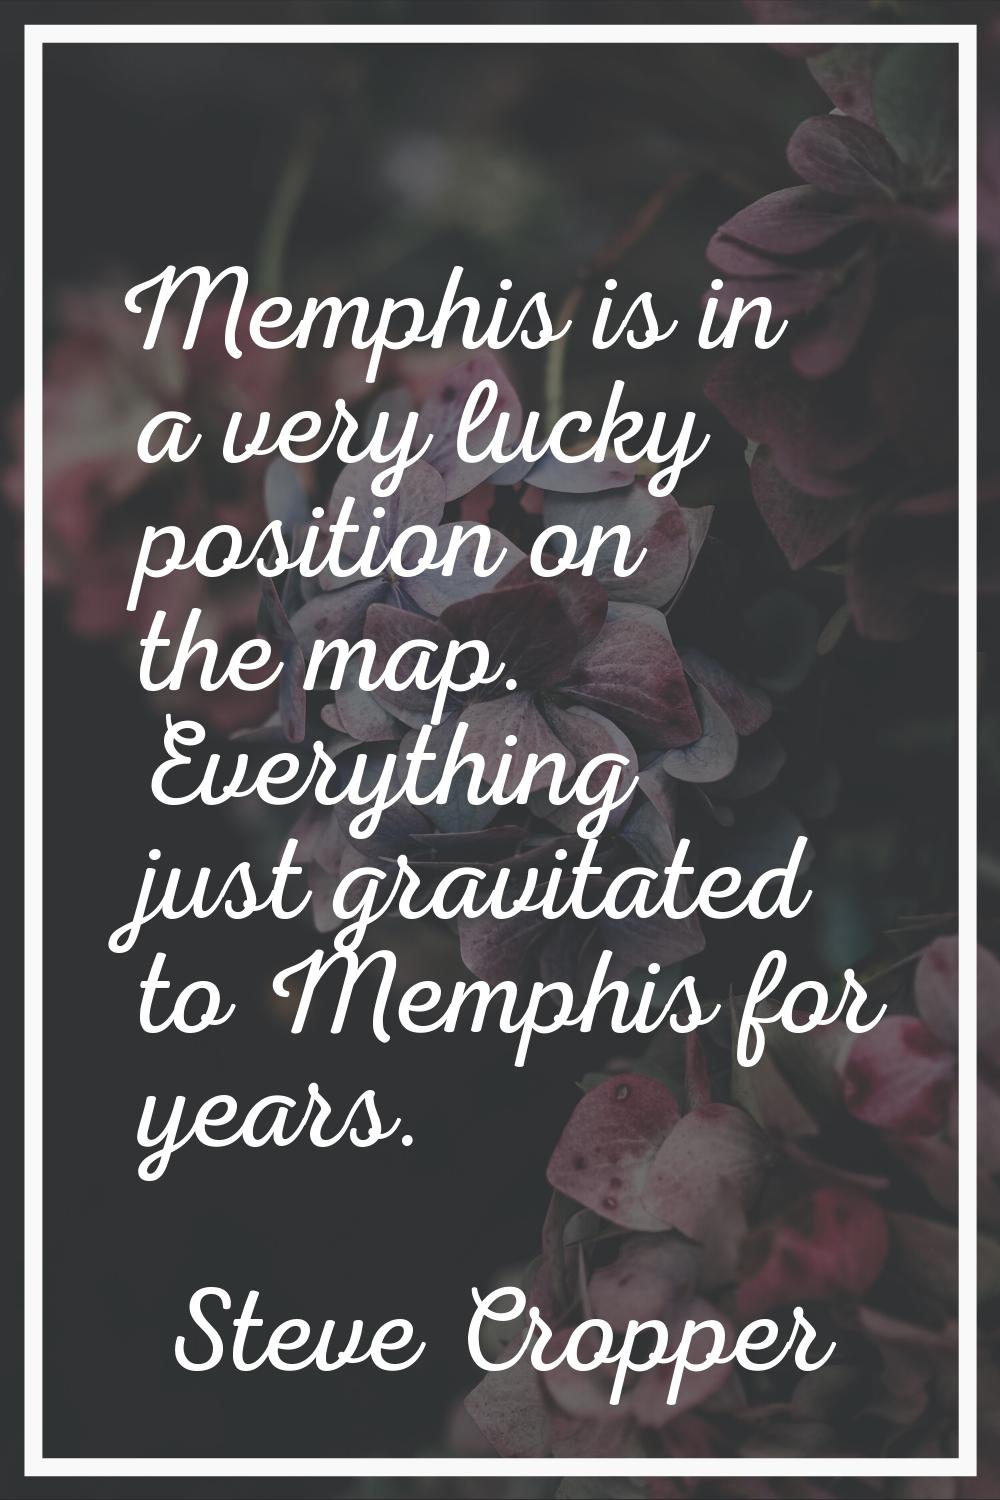 Memphis is in a very lucky position on the map. Everything just gravitated to Memphis for years.